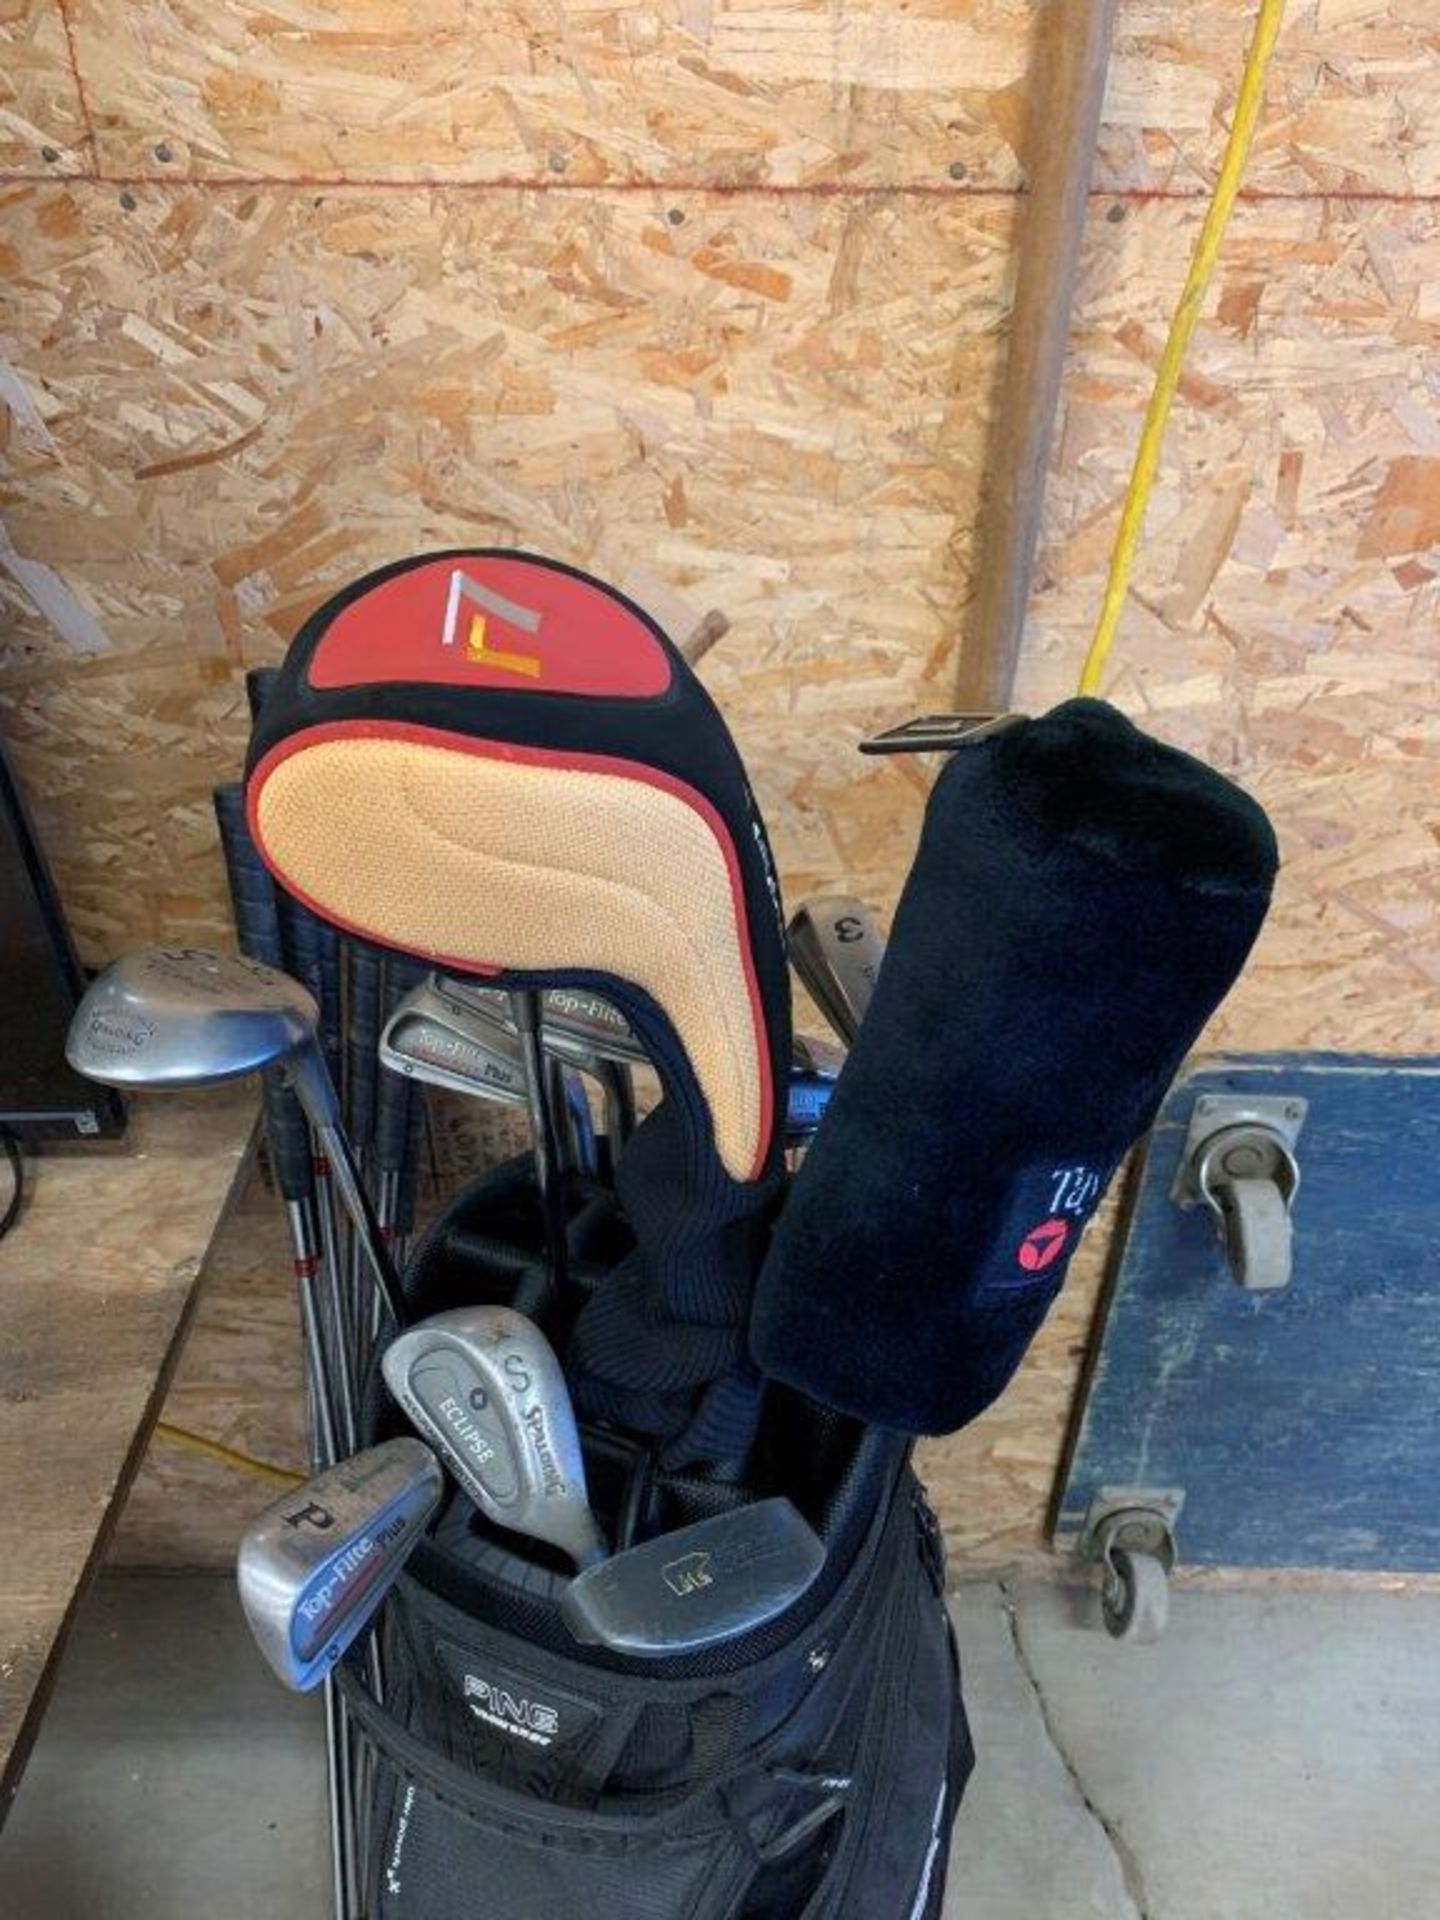 BAG BOY AUTOMATIC GOLF CART W/ PING BAG AND TOP FLITE PLUS CLUBS - Image 3 of 3